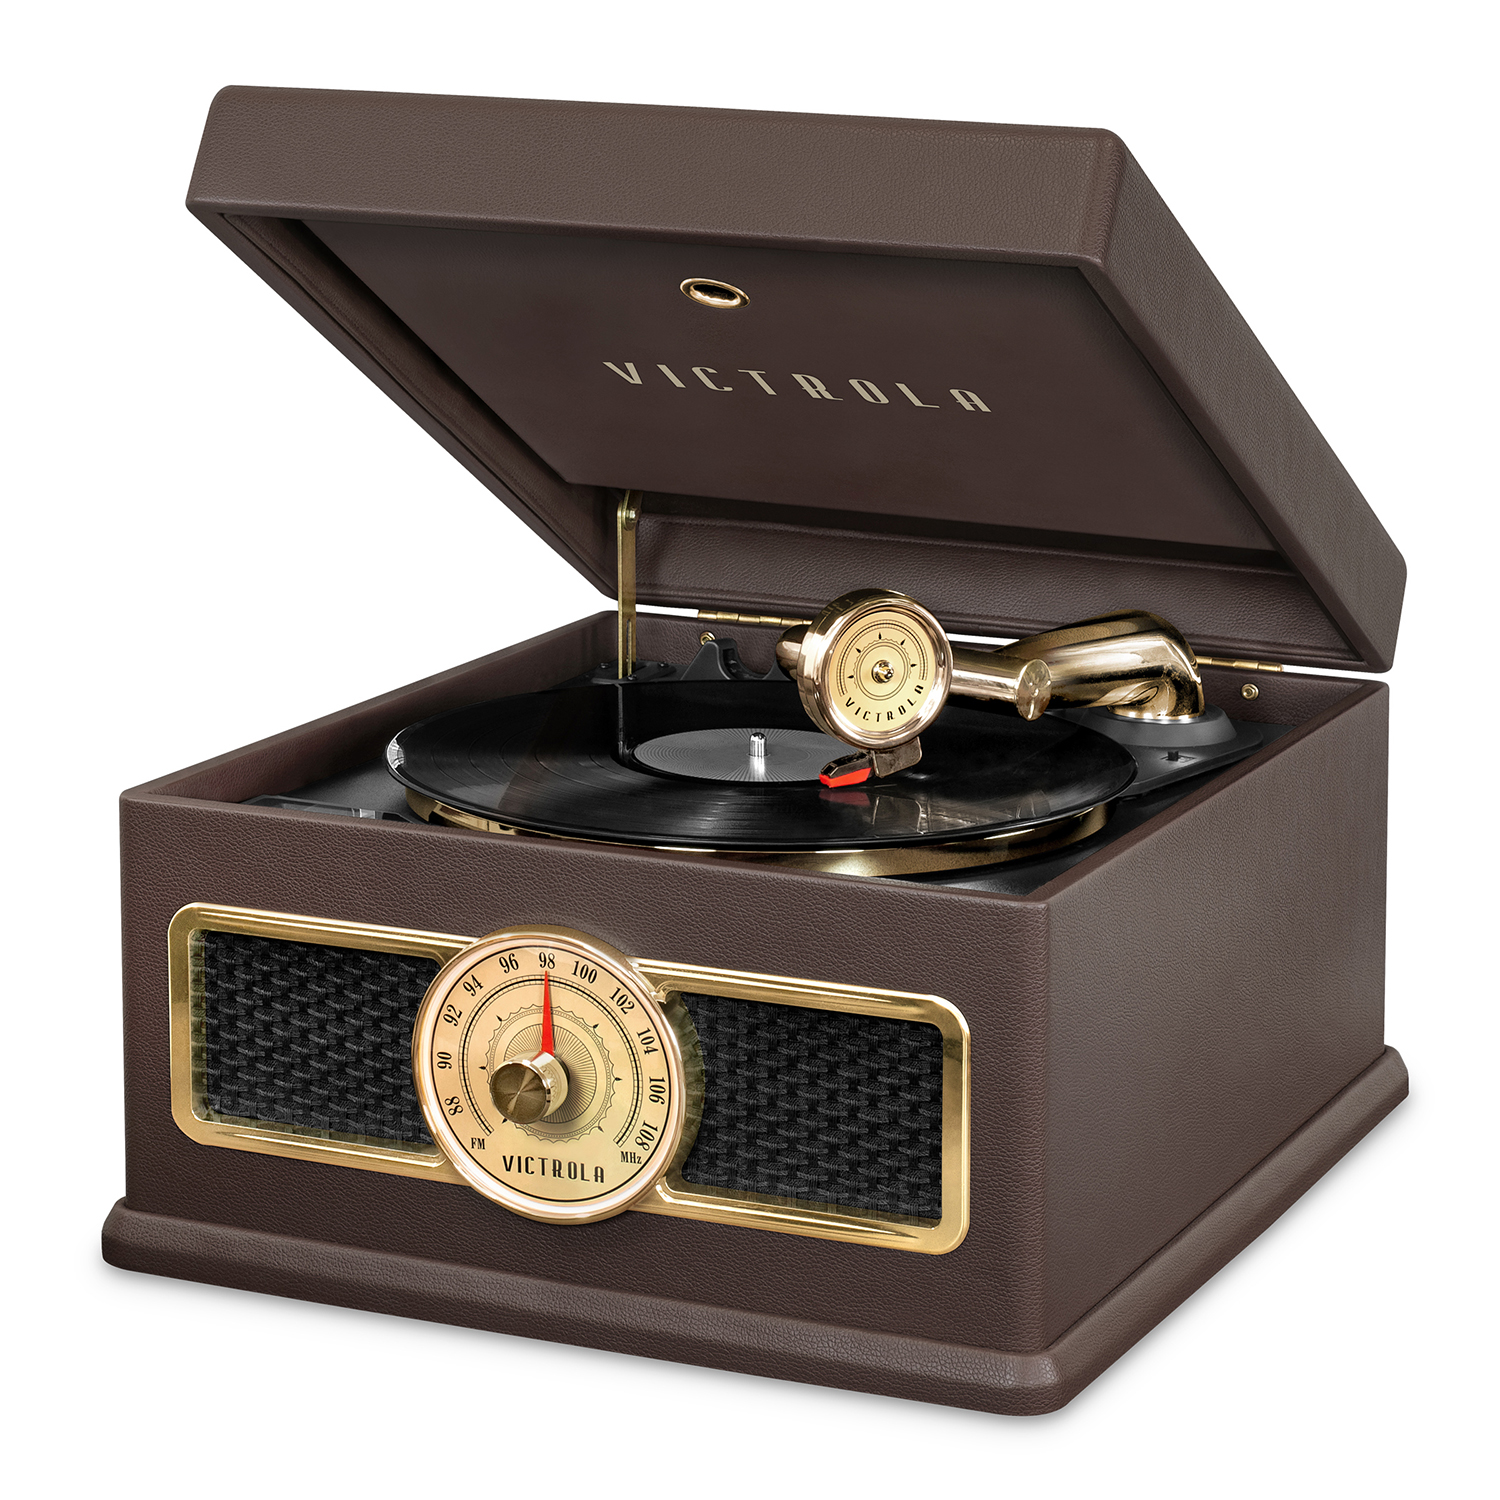 Victrola 5-in-1 Nostalgic Bluetooth Record Player with CD, Radio, Record Storage and 3-Speed Turntable - image 1 of 3